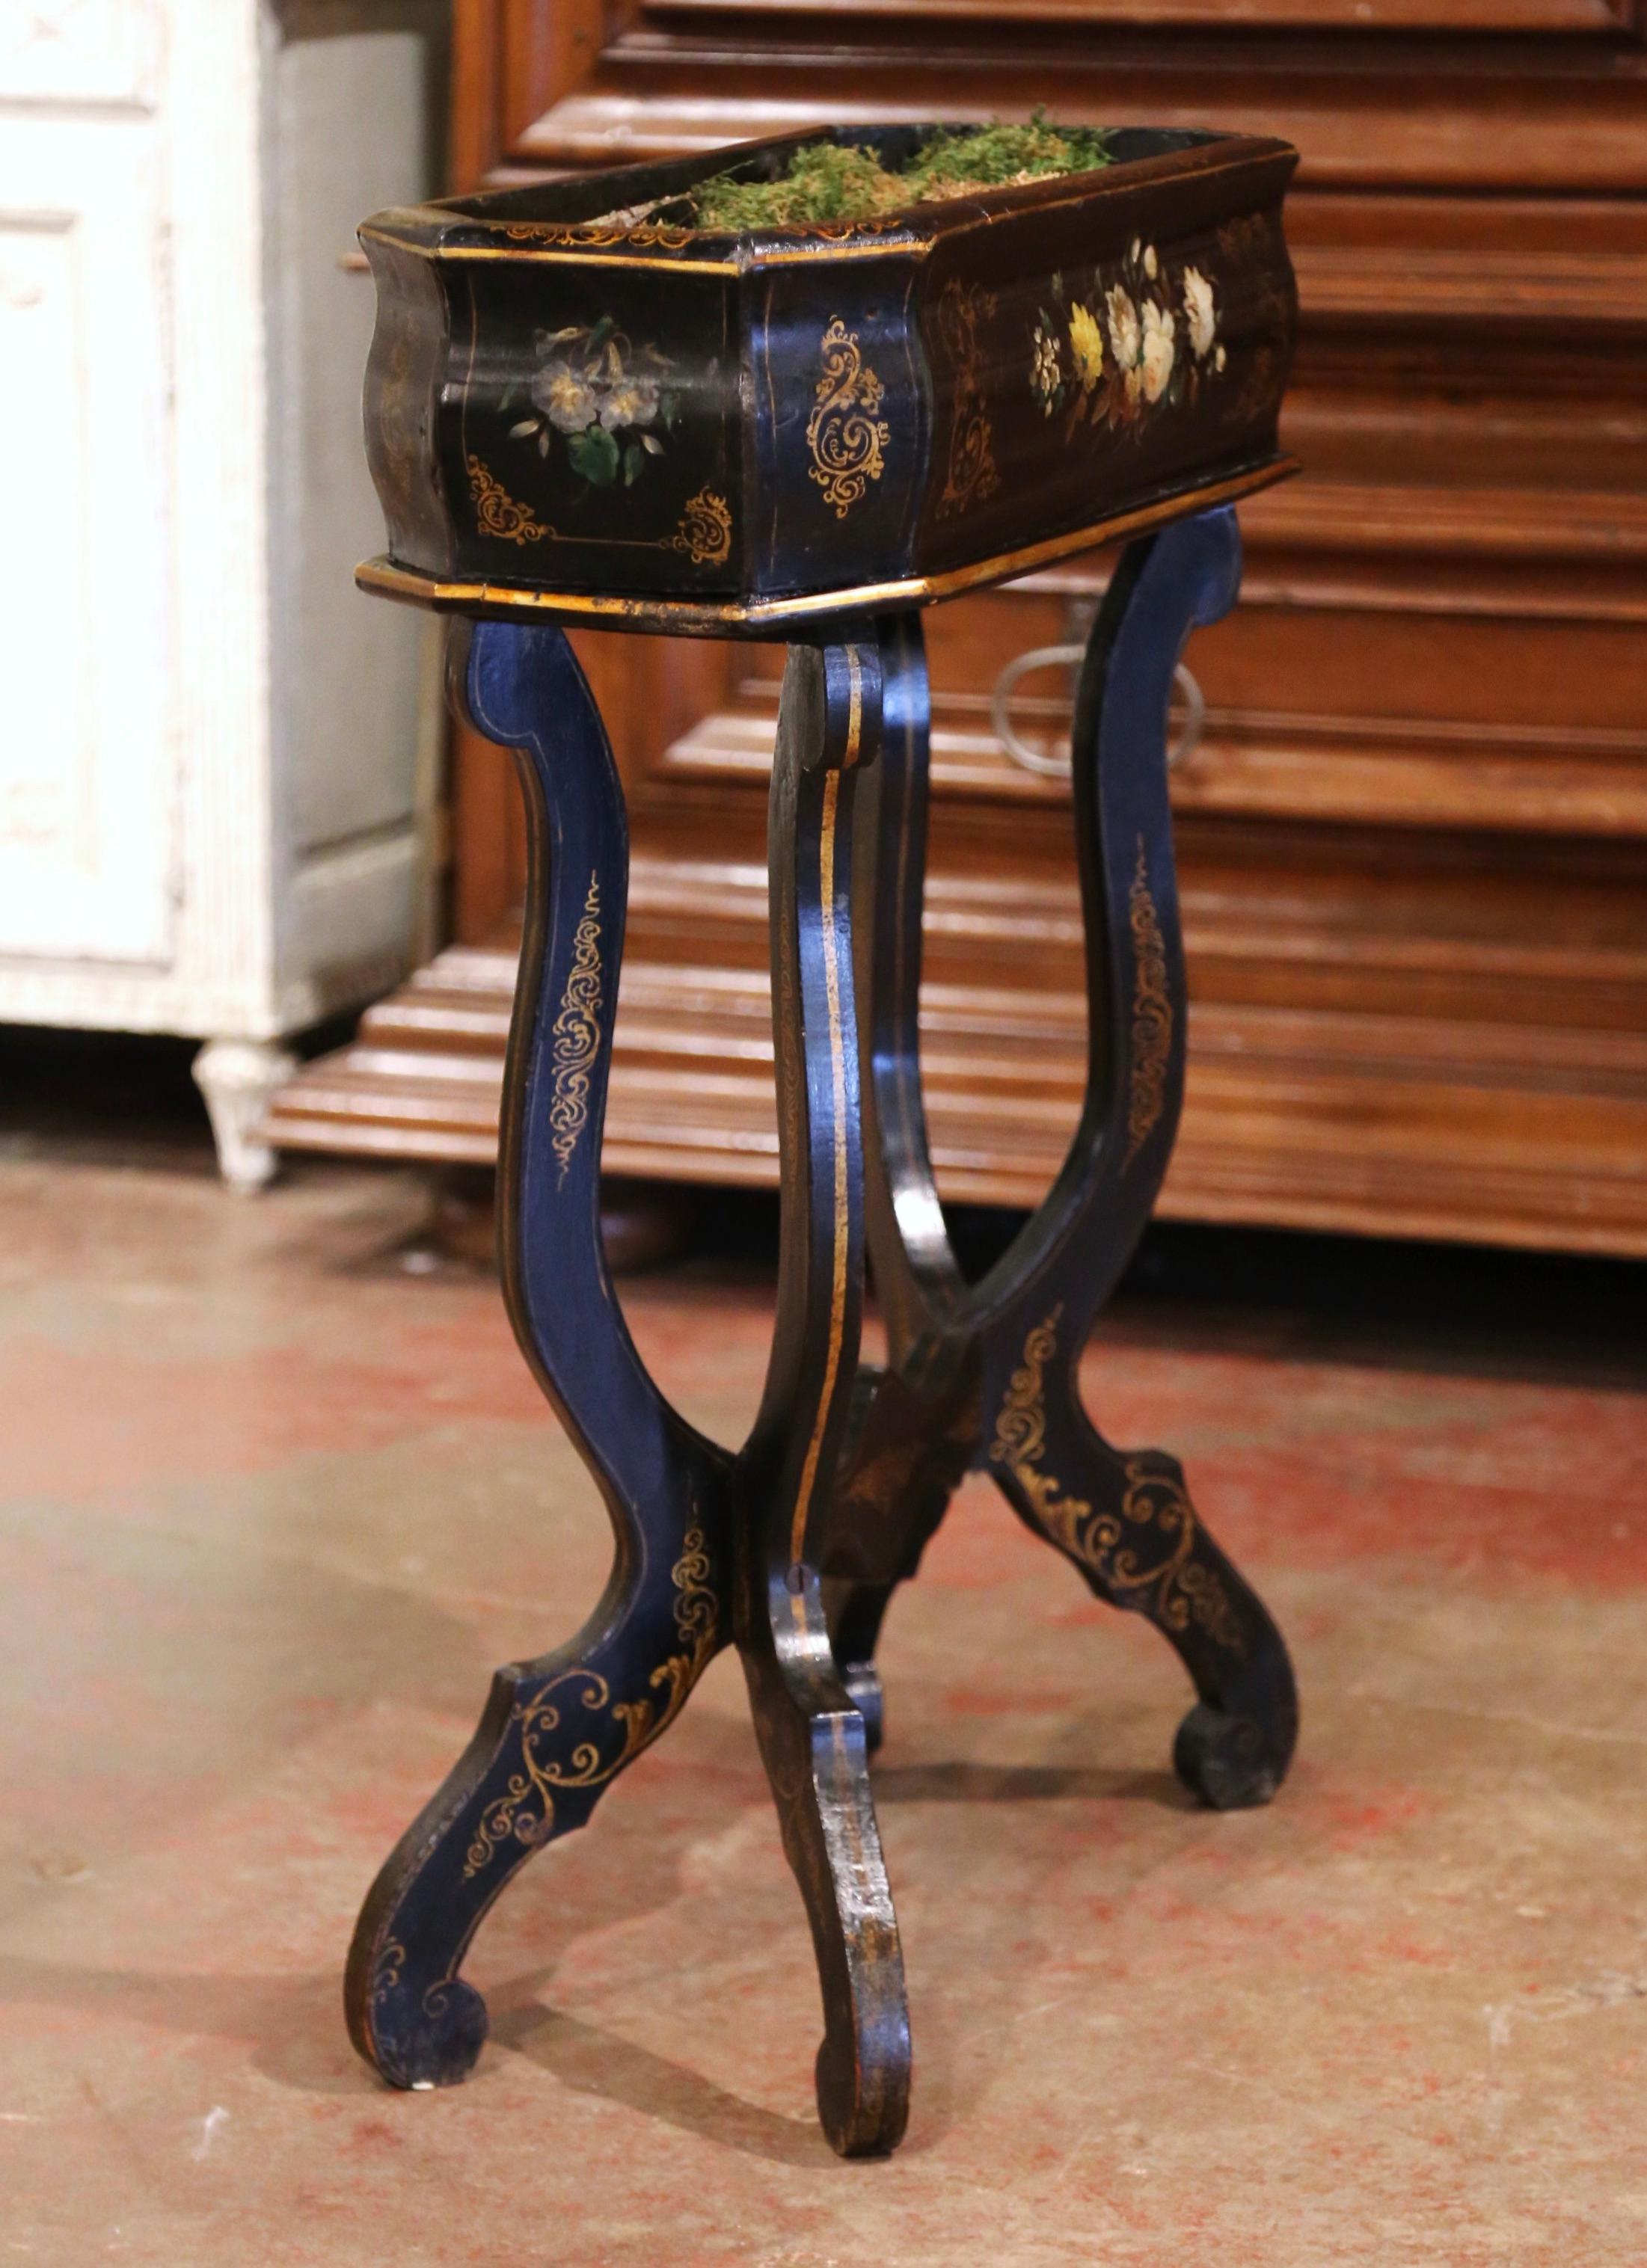 This elegant antique planter was created in France, circa 1870. Standing on four curved legs ending with scrolled feet over a bottom stretcher, the rectangular and bombe blackened jardiniere is decorated with colorful hand-painted floral motifs on